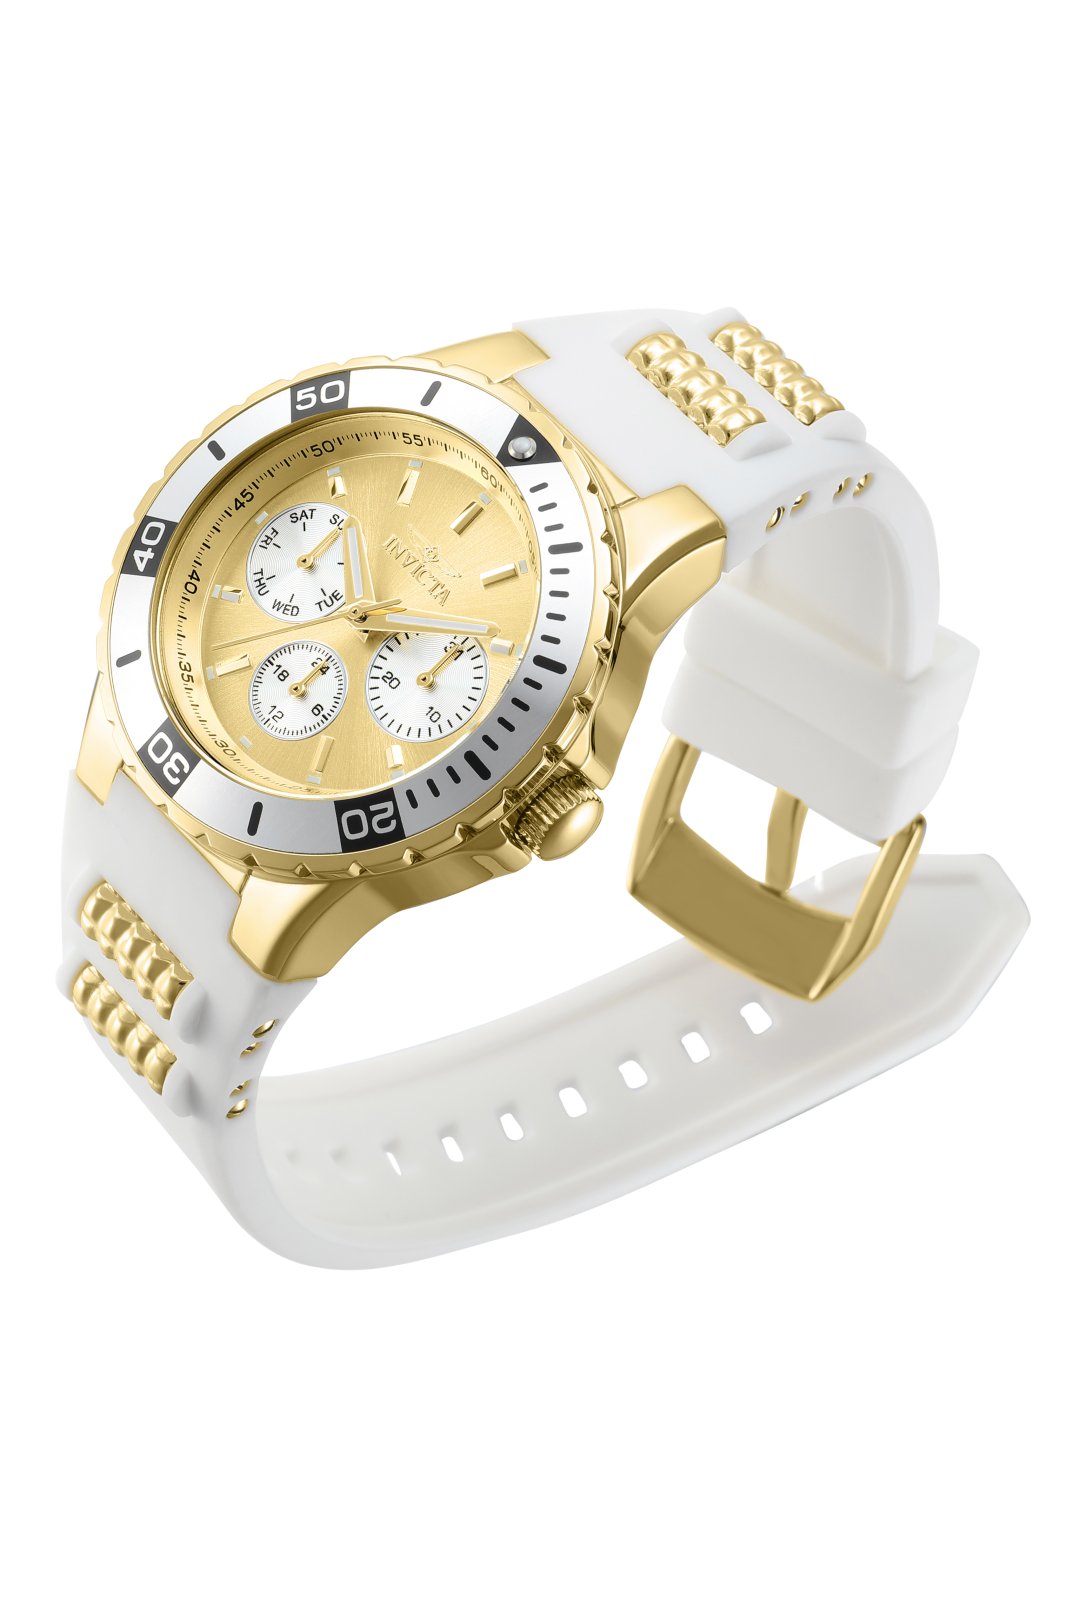 Invicta Watch Aviator 37317 - Official Invicta Store - Buy Online!